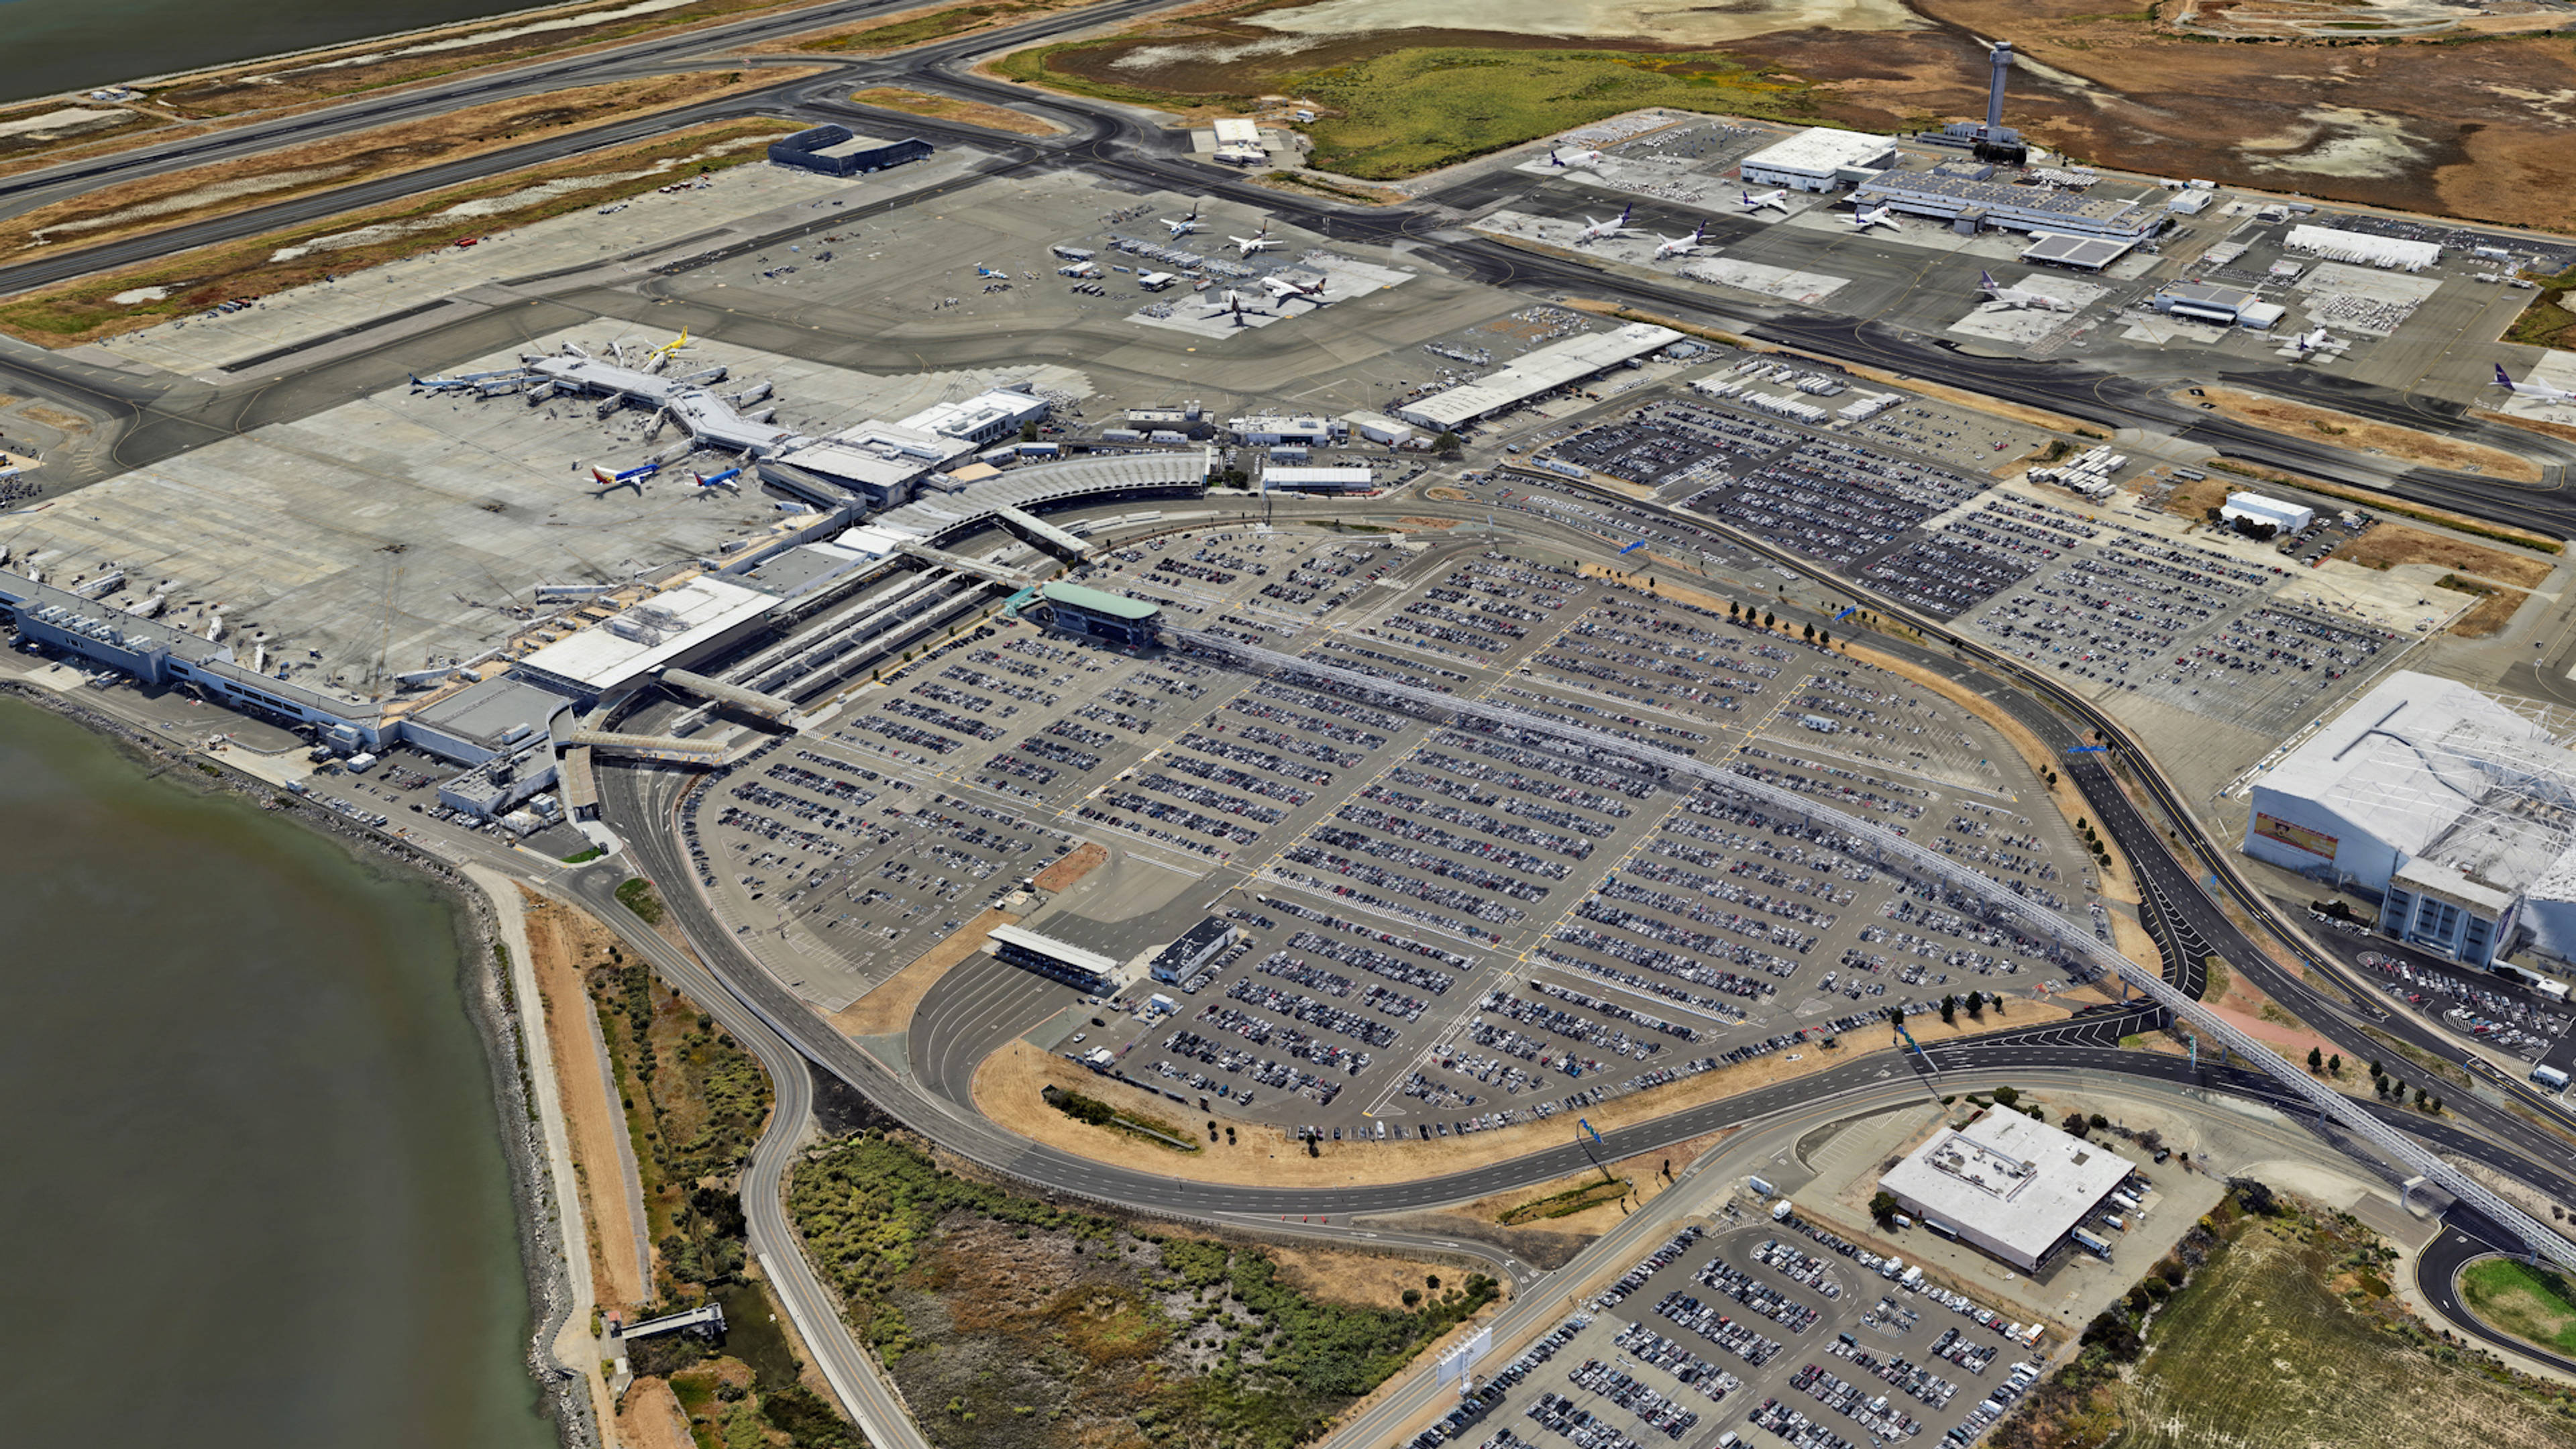  Aerial View of Oakland Airport Parking